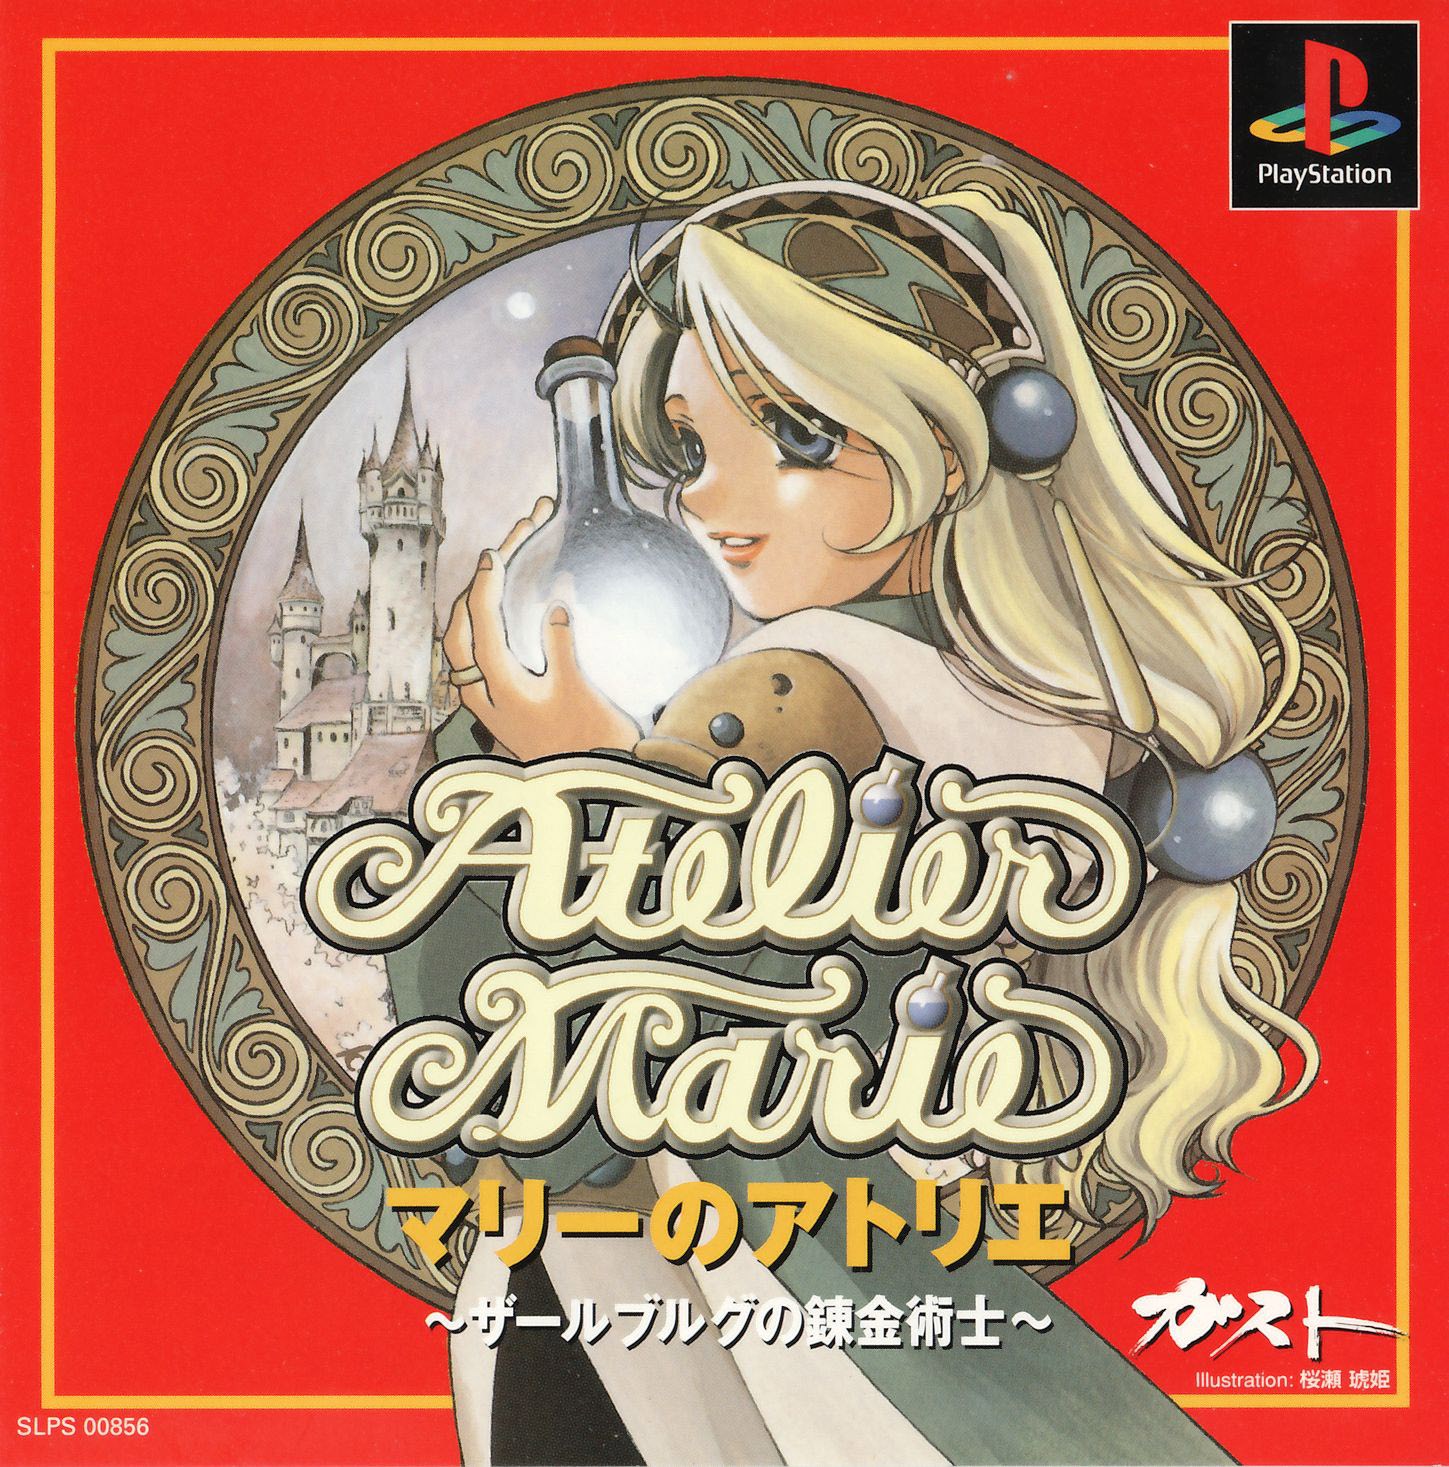 Marie game. Atelier Elie: the Alchemist of Salburg 2. Atelier Marie: the Alchemist of Salburg. Игра Atelier Marie Remake: the Alchemist of Salburg. Atelier Marie + Elie ~Salburg no Renkinjutsushi 1 & 2.